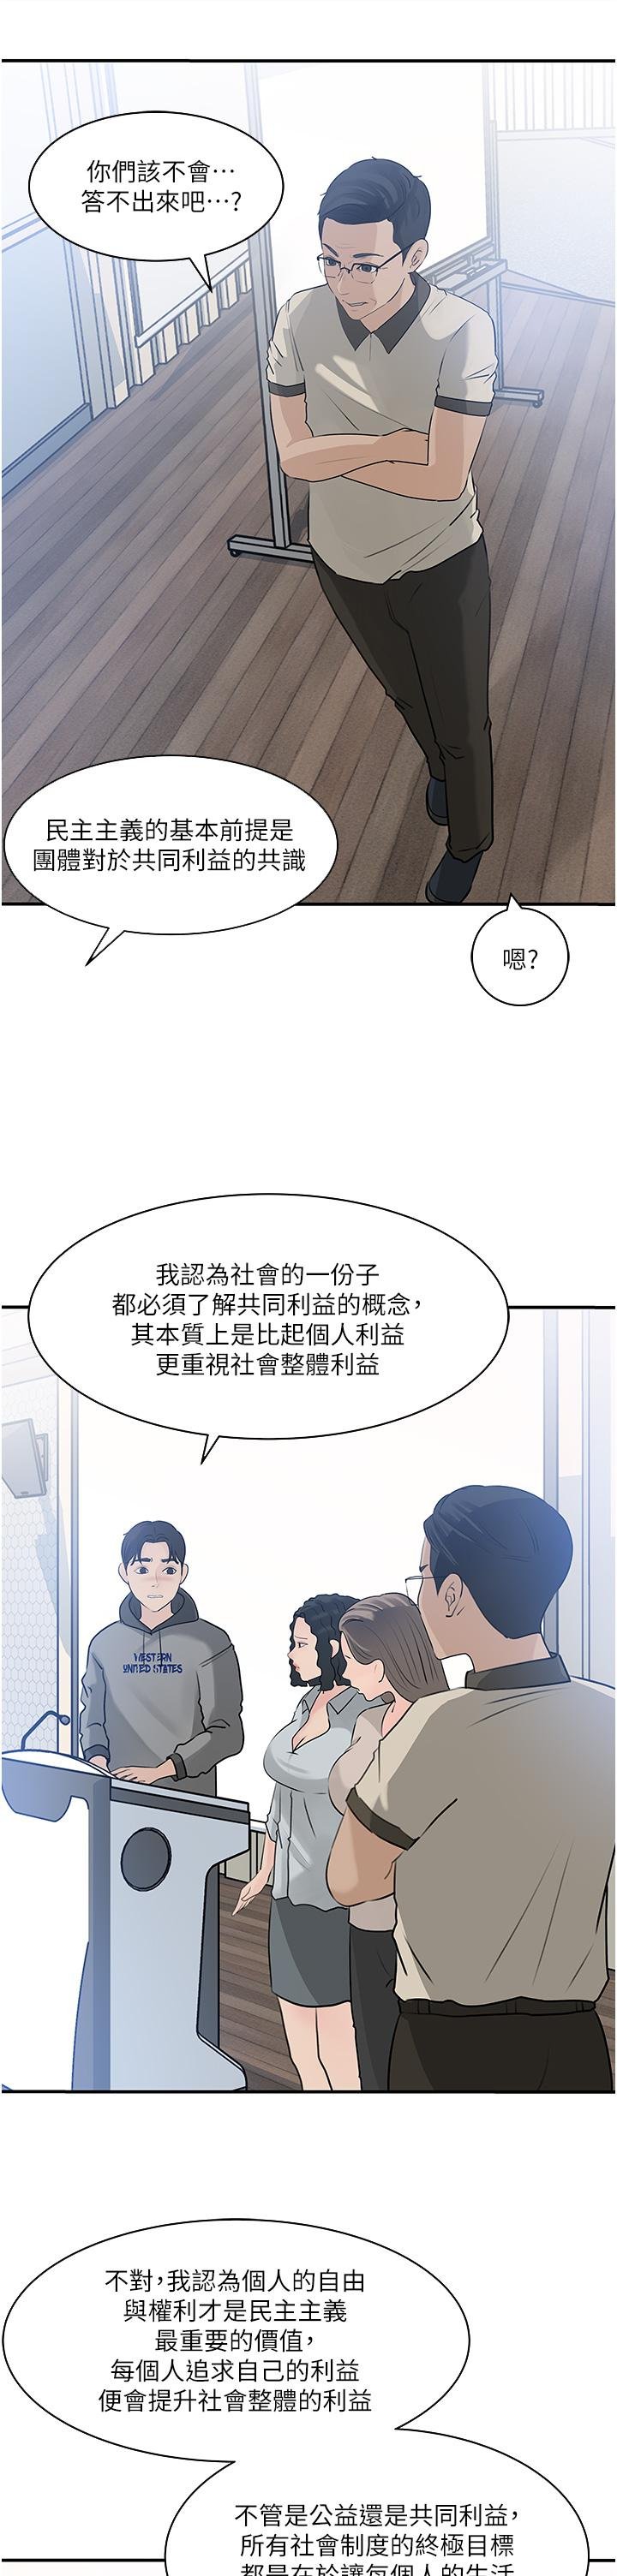 in-my-sister-in-law-raw-chap-38-36